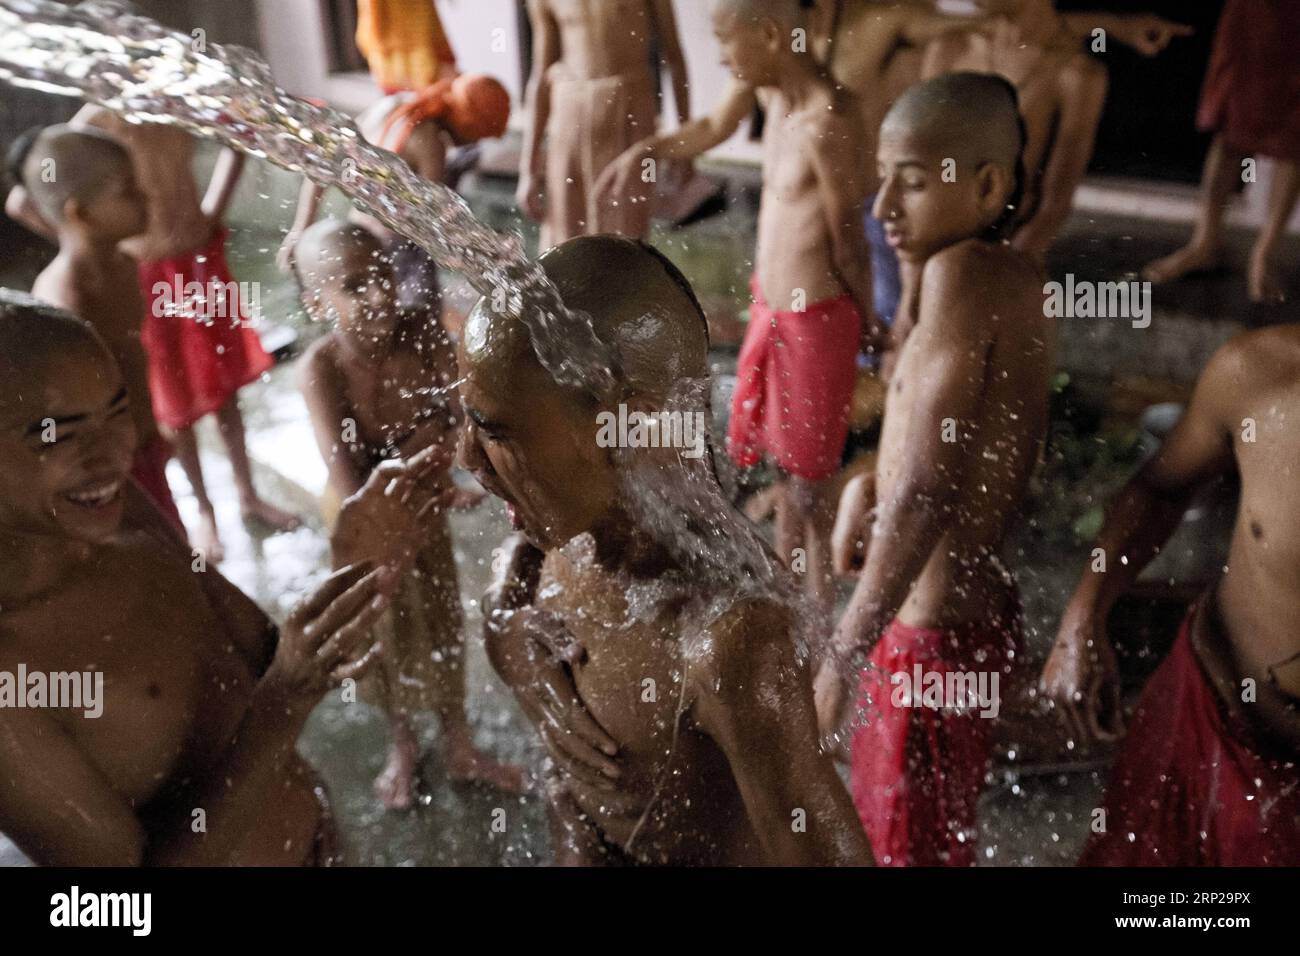 (180826) -- KATHMANDU, Aug. 26, 2018 -- Young Hindu priests take bath during the Janai Purnima festival at the Pashupatinath Temple in Kathmandu, Nepal on Aug. 26, 2018. During this festival, Hindus take holy bath and perform annual change of the Janai, a sacred cotton string worn around their chest or tied on the wrist, in the belief that it will protect and purify them. ) (dtf) NEPAL-KATHMANDU-JANAI PURNIMA-FESTIVAL sulavxshrestha PUBLICATIONxNOTxINxCHN Stock Photo